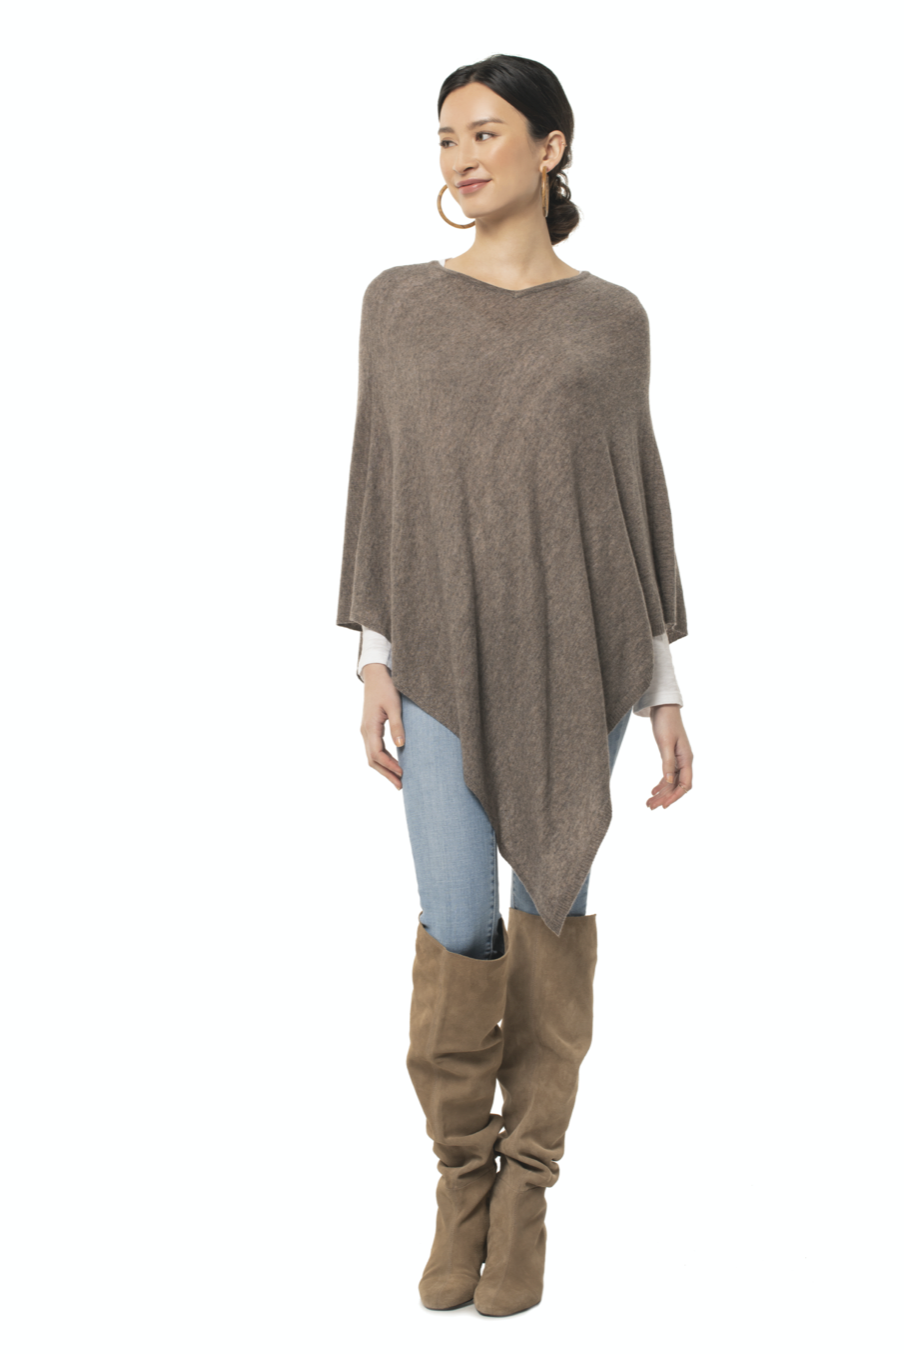 Synergy V-Neck Poncho - East Hills Casuals